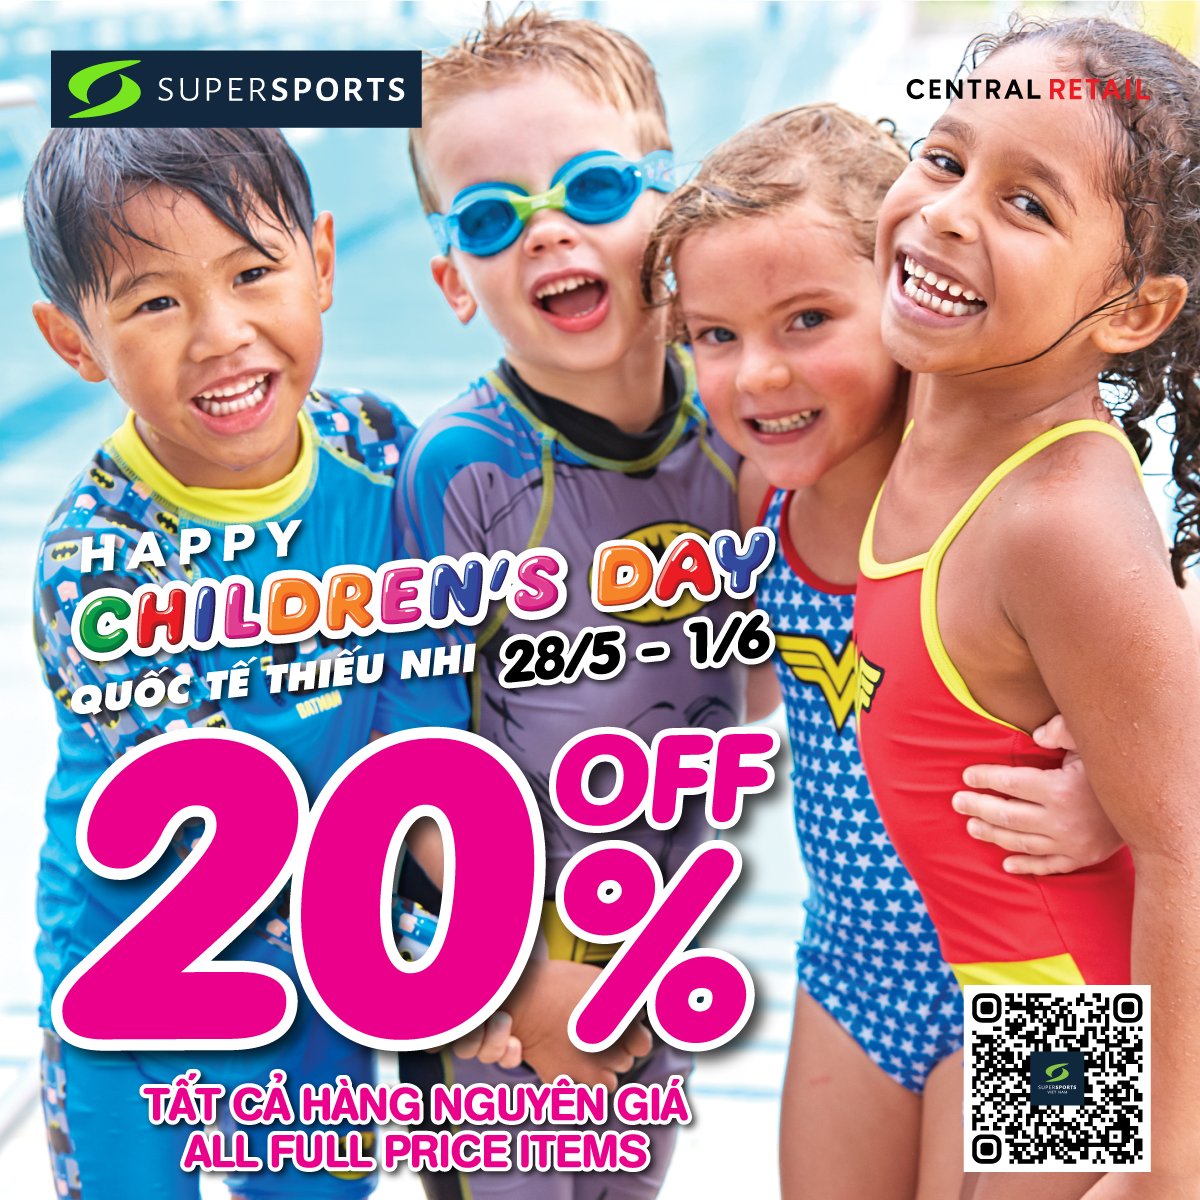 HAPPY CHILDREN'S DAY - SUPERSPORTS DISCOUNT 20% ALL FULL PRICE ITEMS